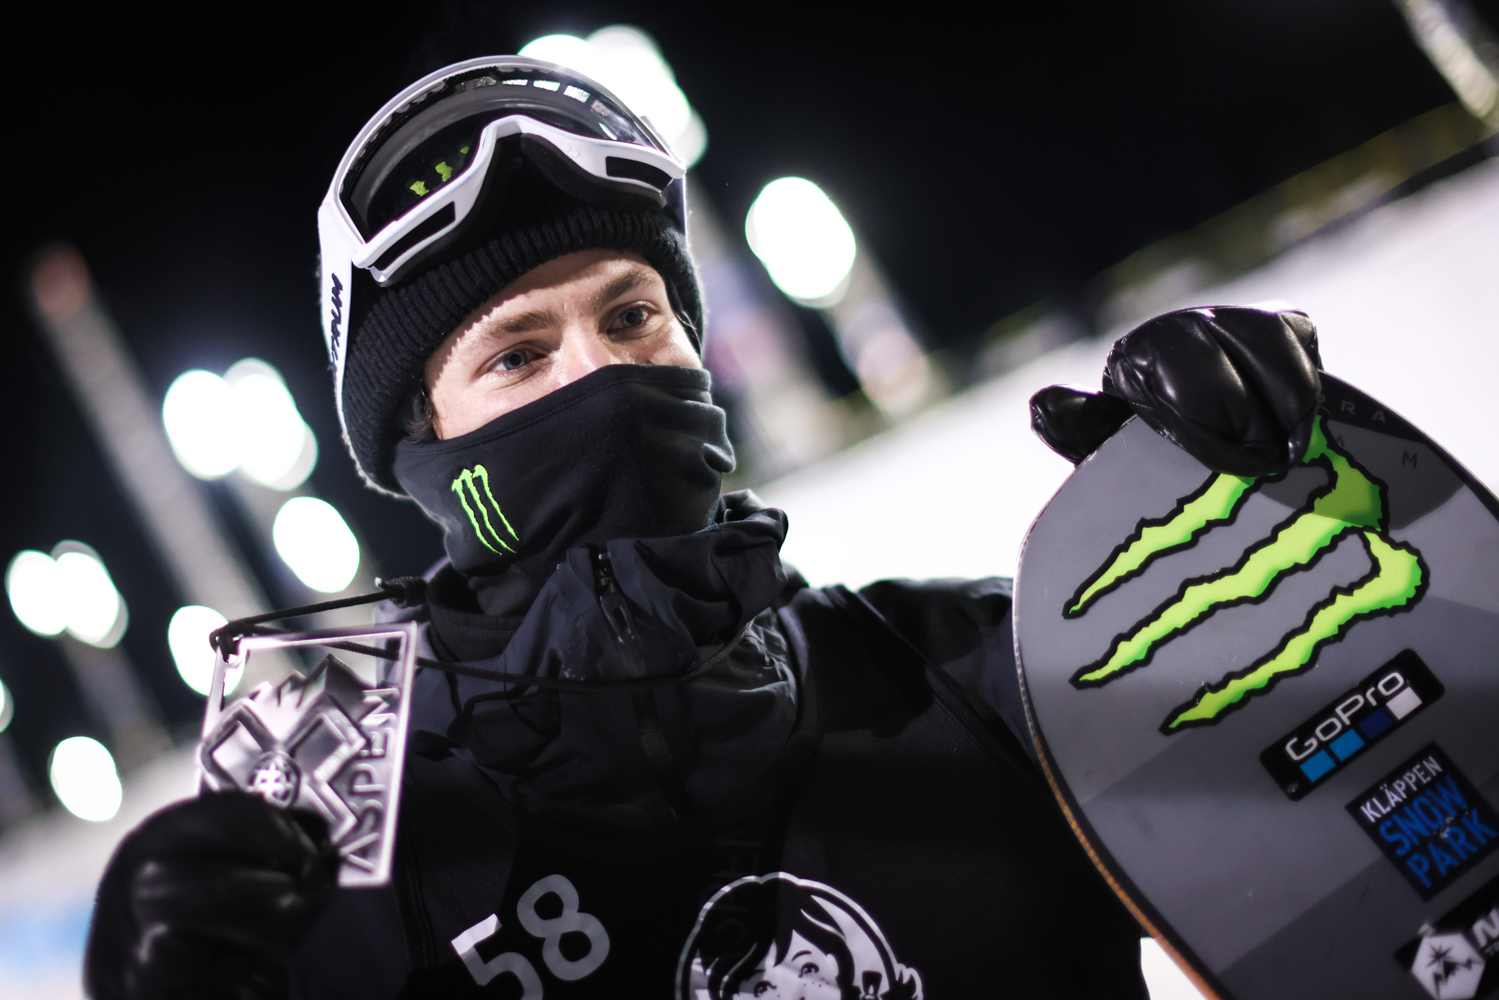 Monster Energy's Sven Thorgren Will Compete in Men's Snowboard Slopestyle and Men's Snowboard Big Air at X Games Aspen 2022